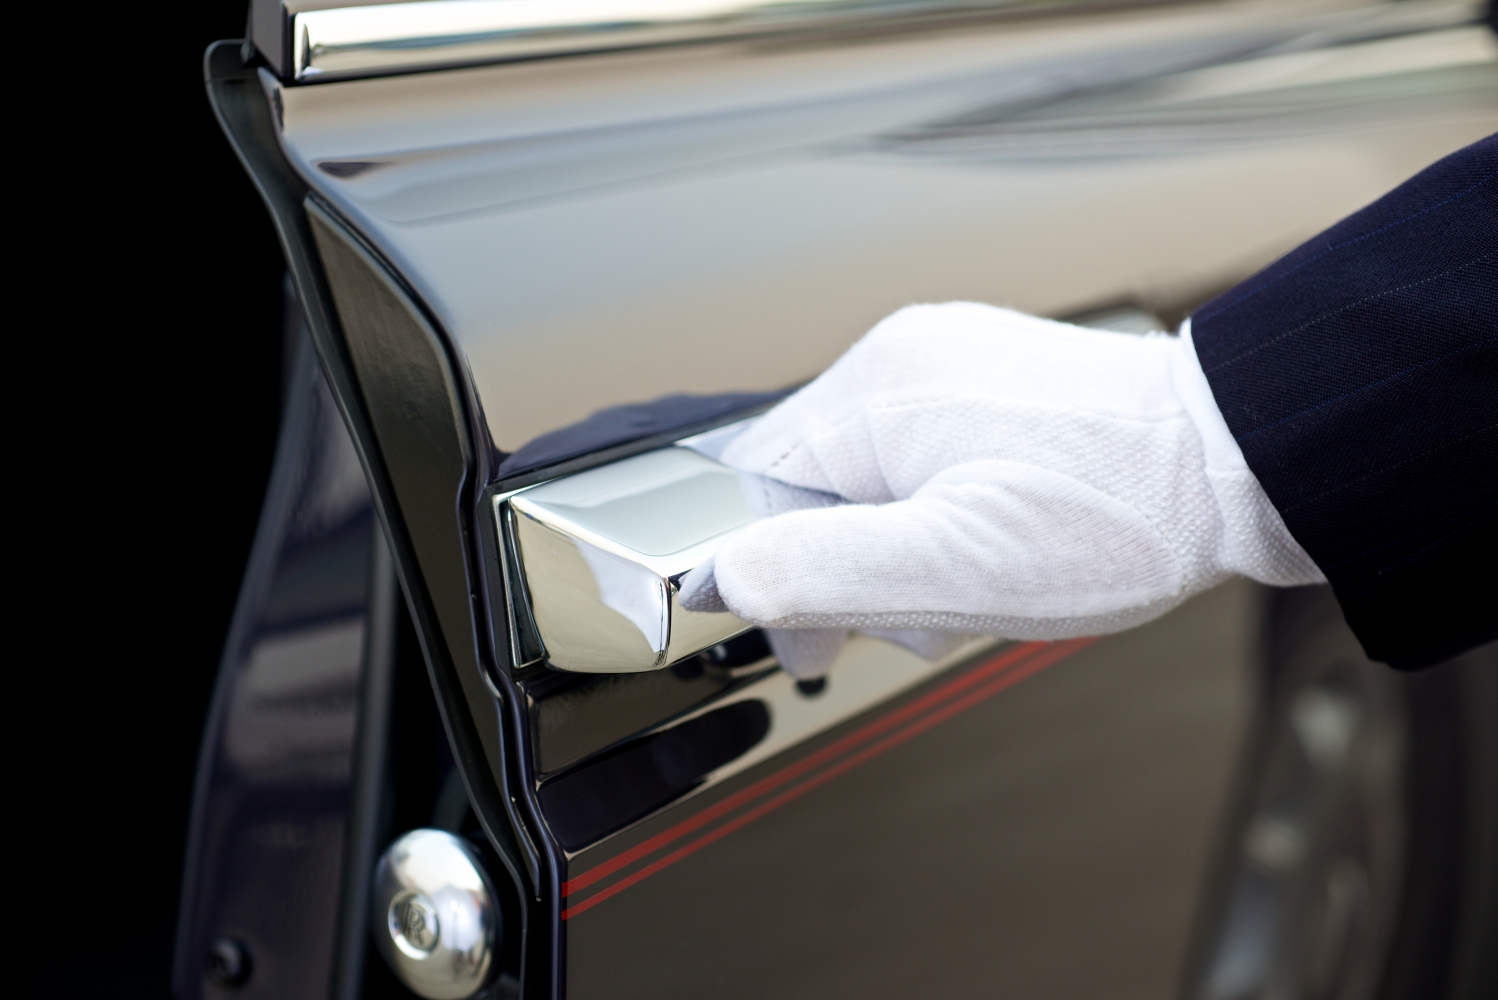 End valet parking woes with Via Valet!